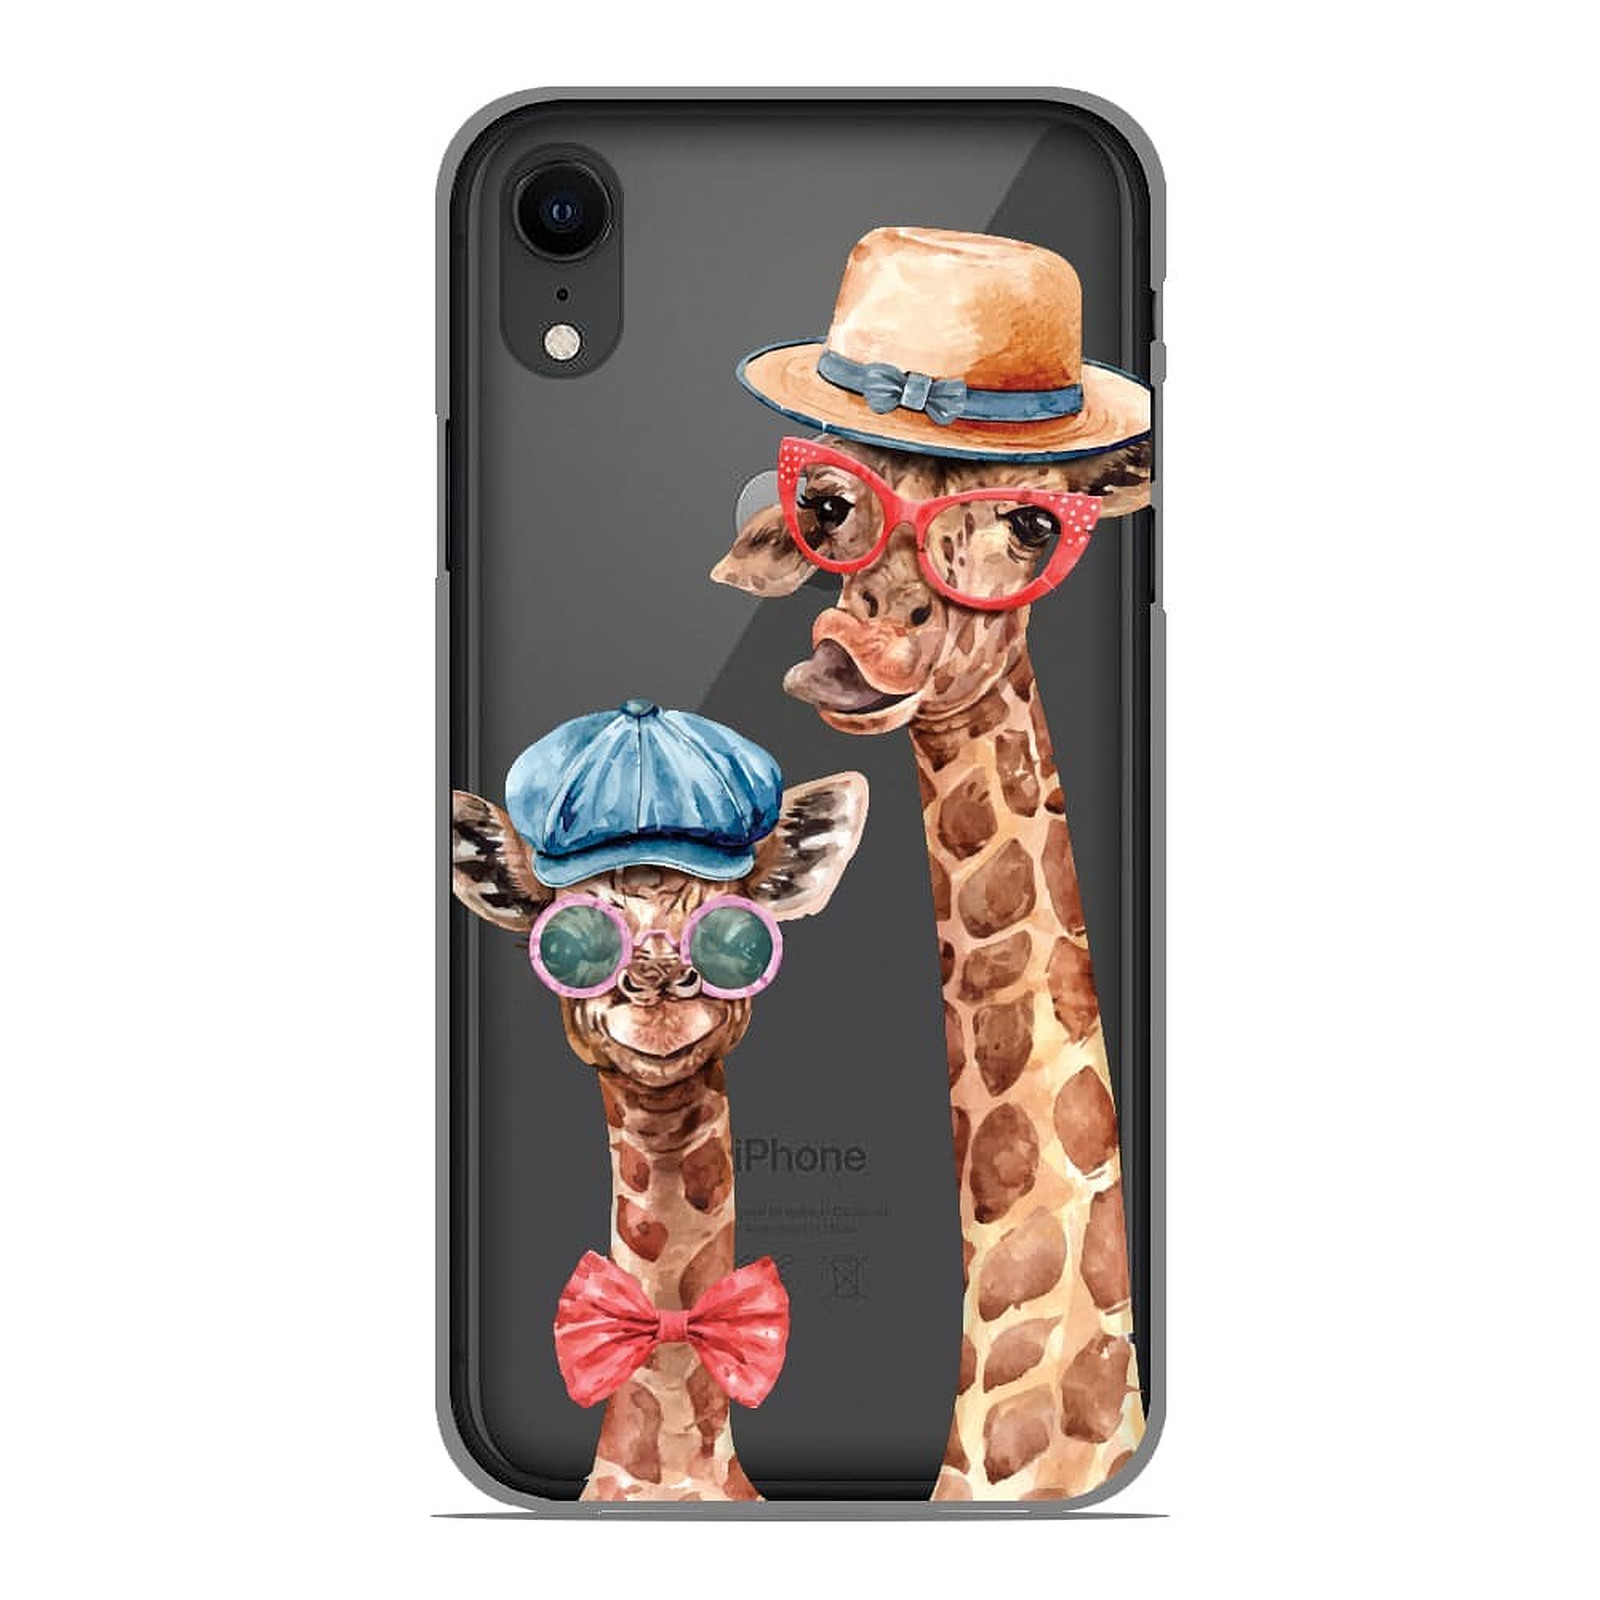 1001 Coques Coque silicone gel Apple iPhone XR motif Funny Girafe - Coque telephone 1001Coques